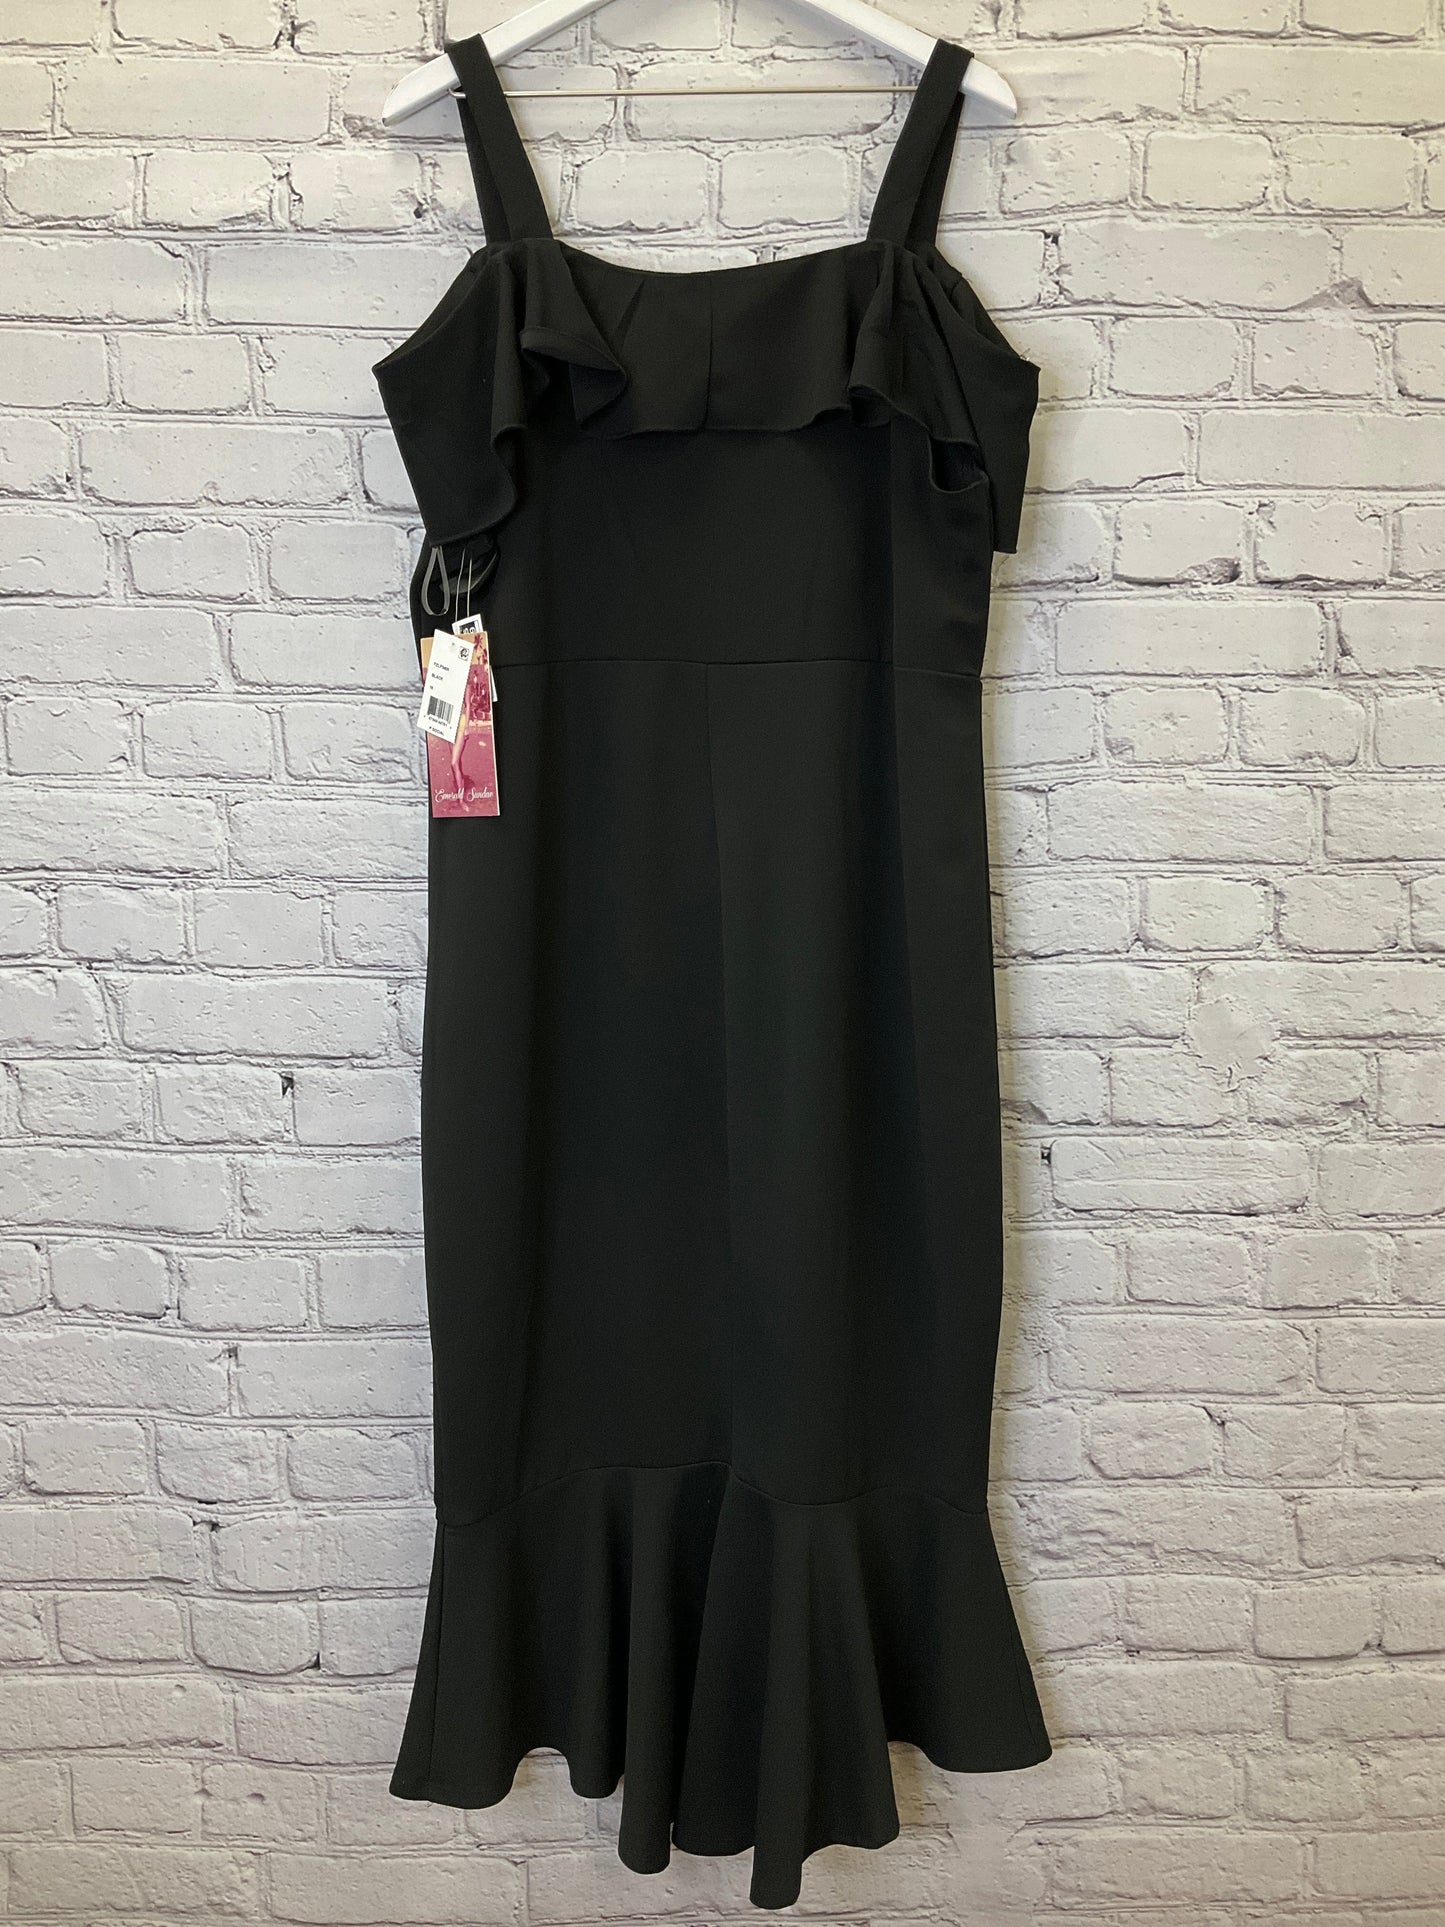 Dress Party Long By Clothes Mentor  Size: 2x